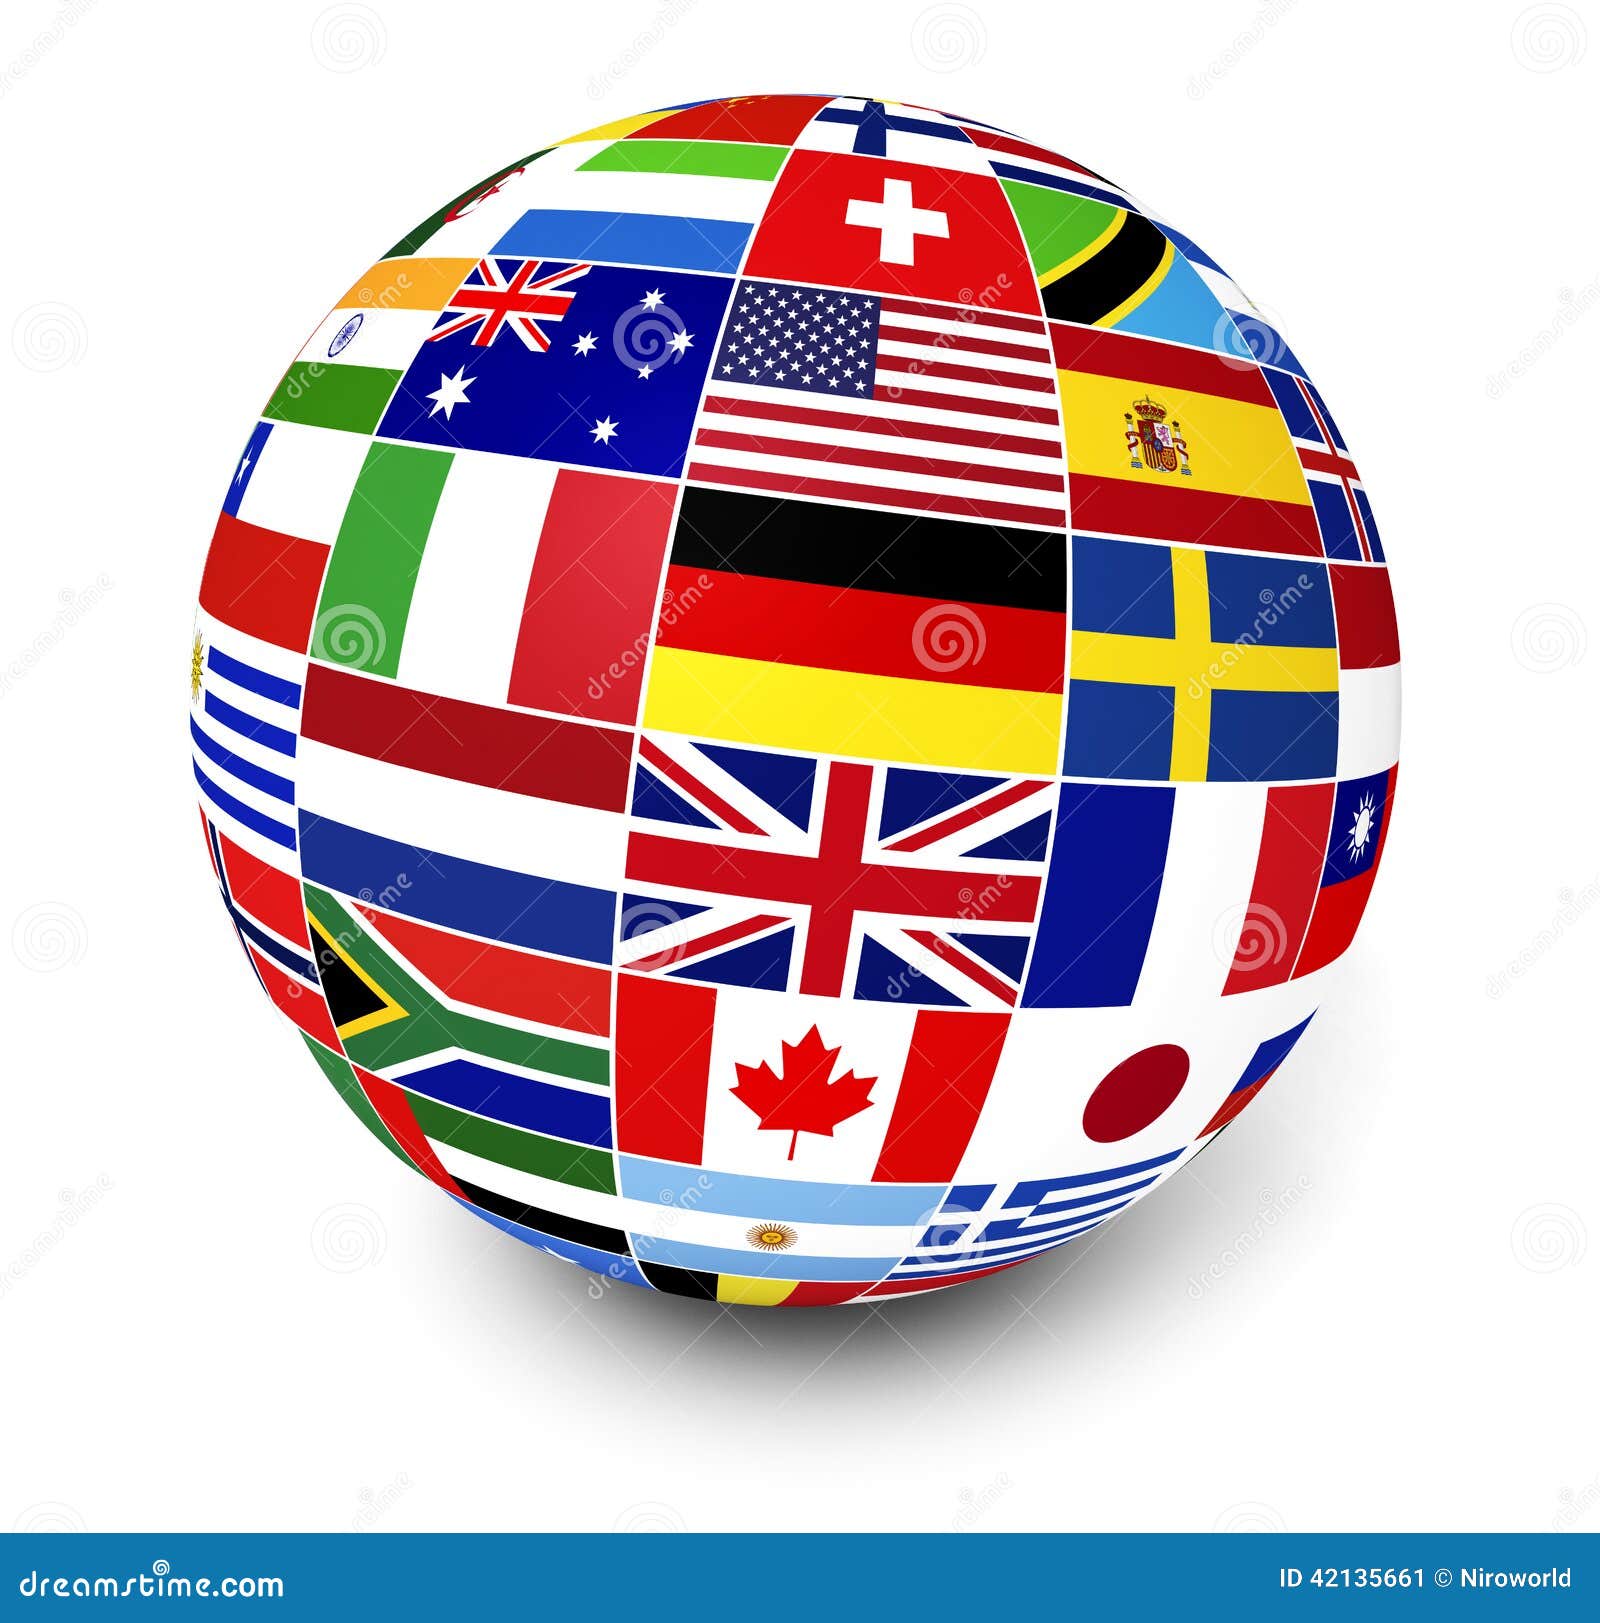 global business clipart - photo #50